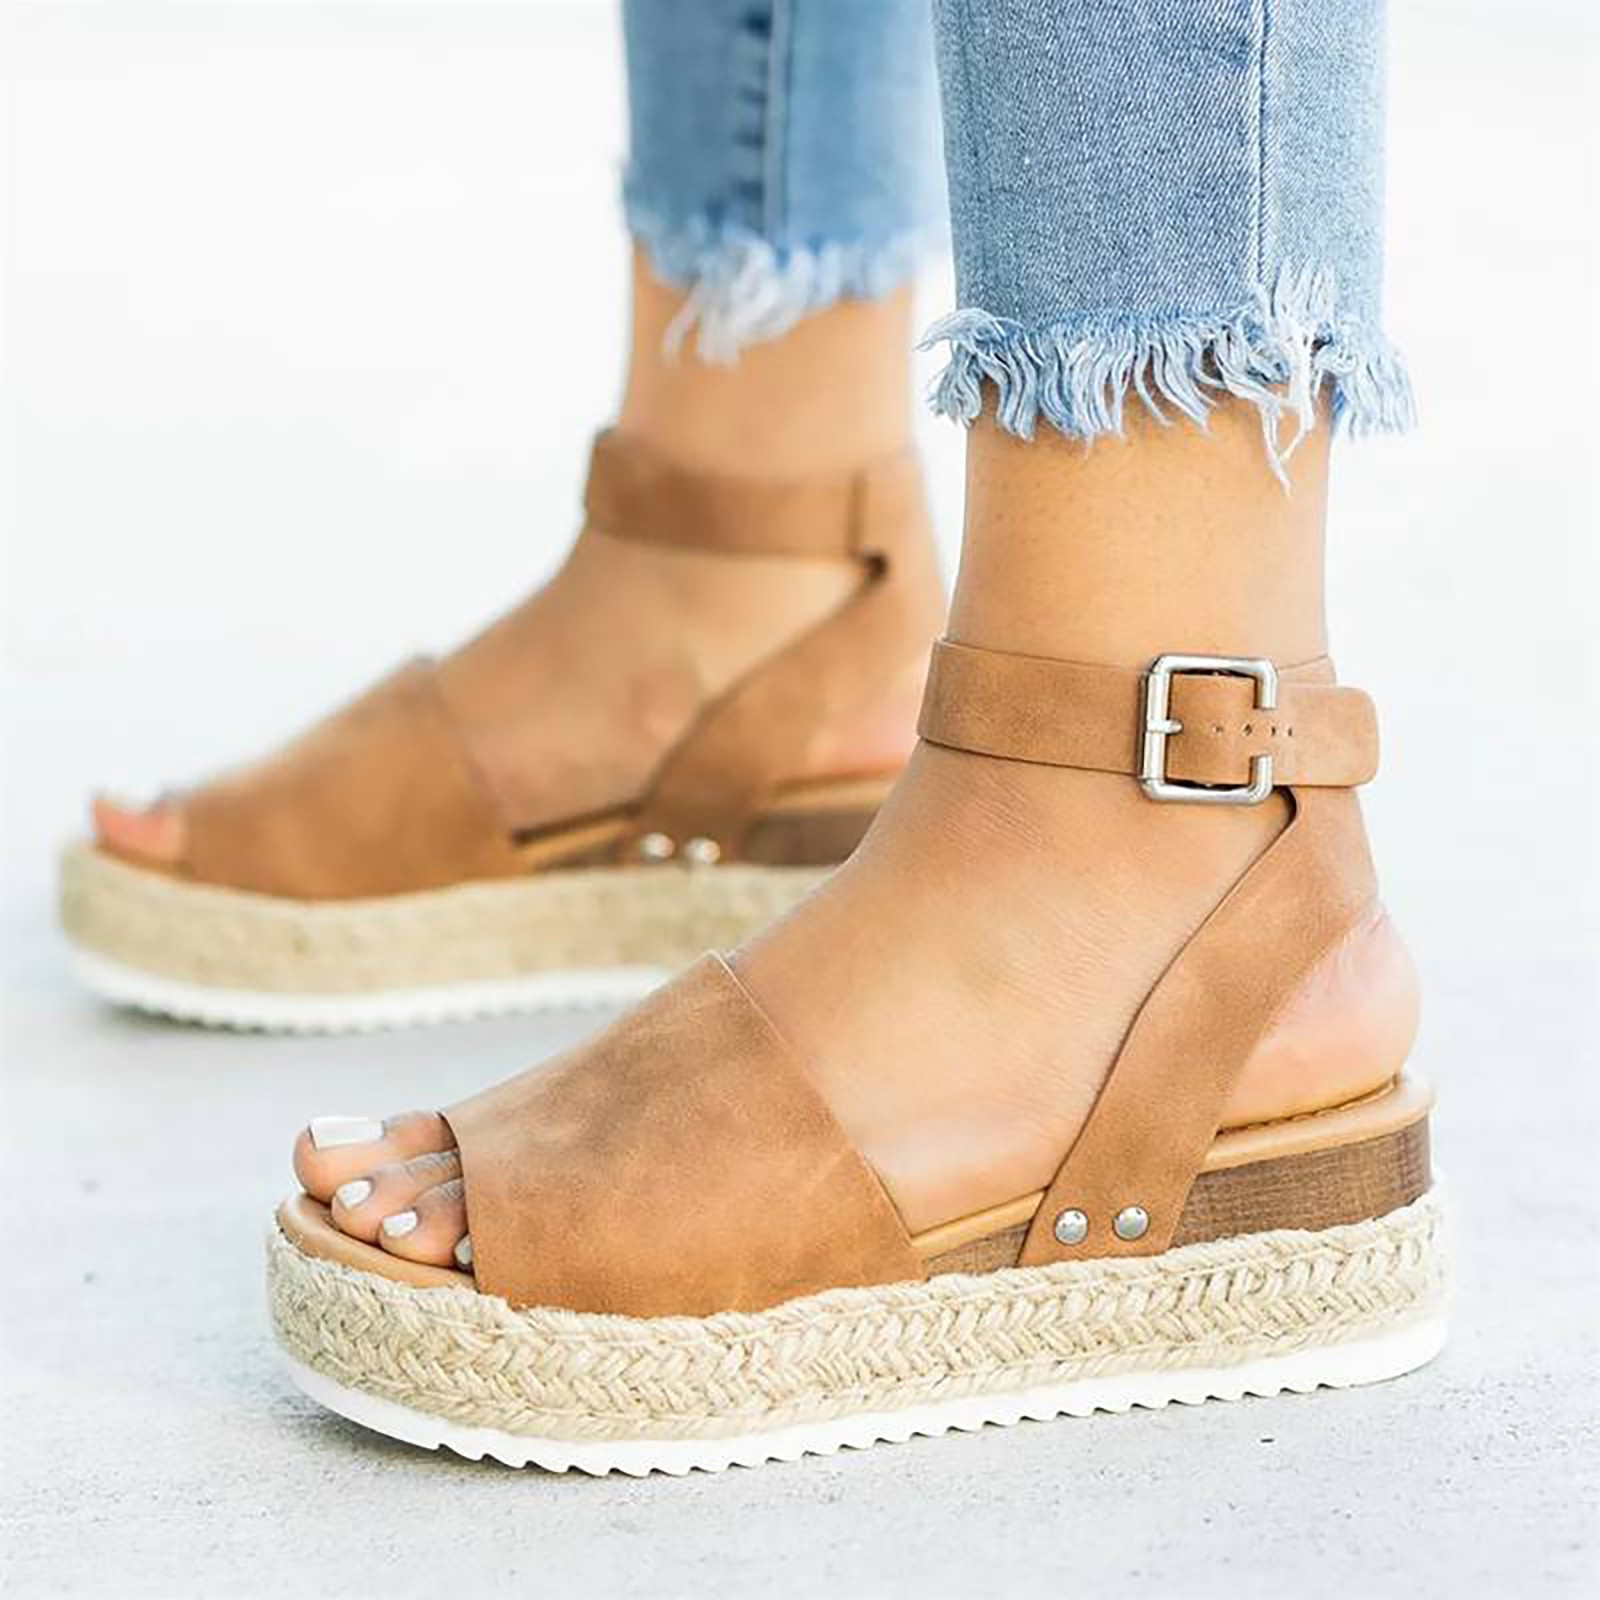 Azrian Woman Summer Sandals Open toe Casual Platform Wedge Shoes Casual Canvas Shoes - image 5 of 6